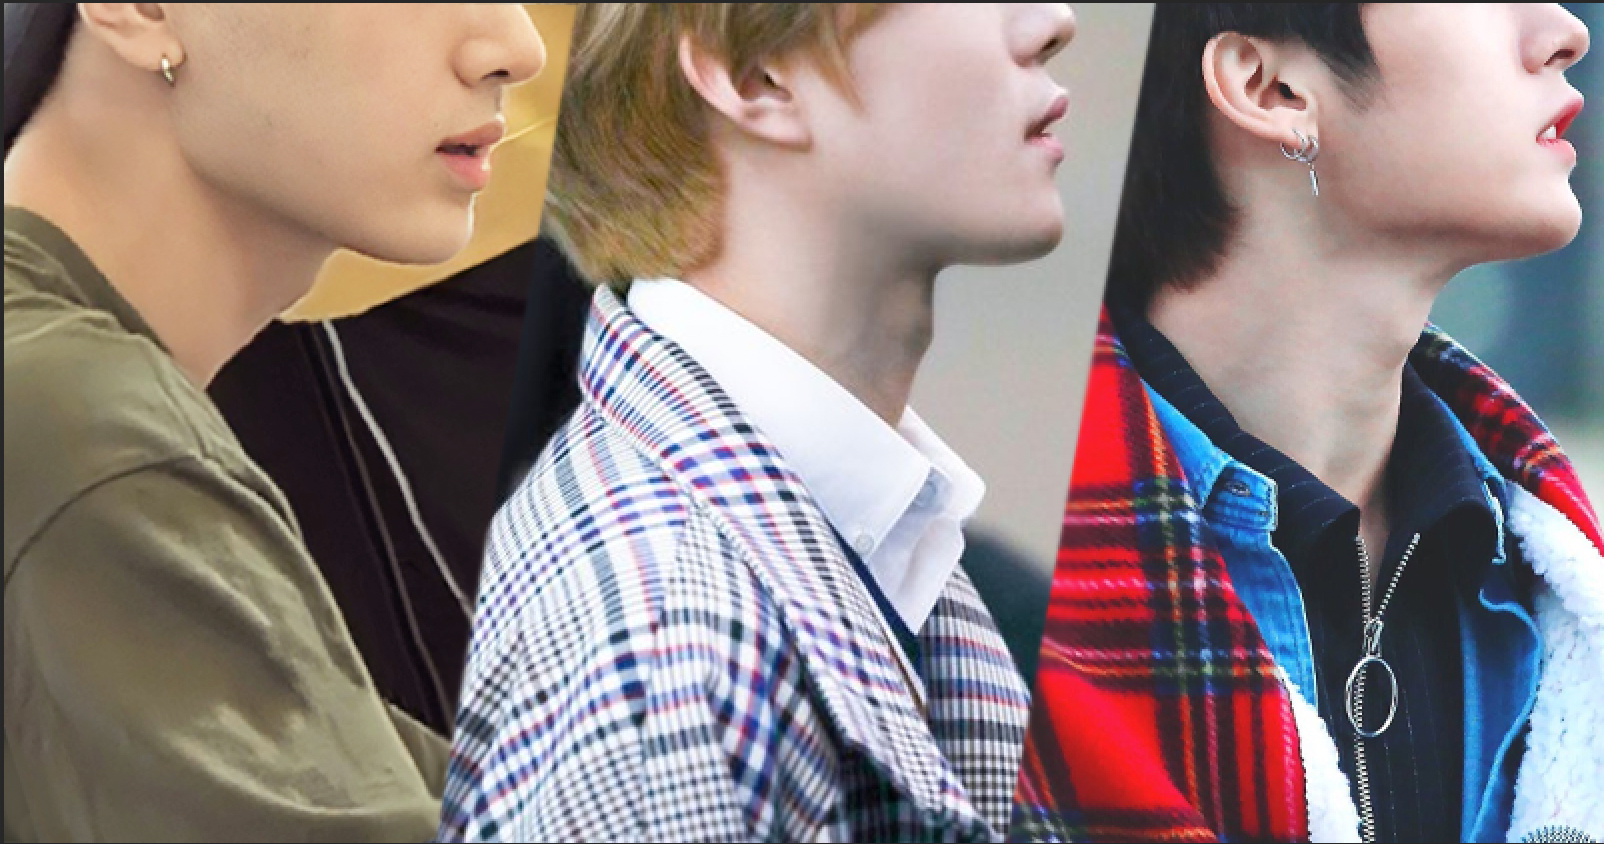 Top 10 K-pop Idols With The Best Side Profiles